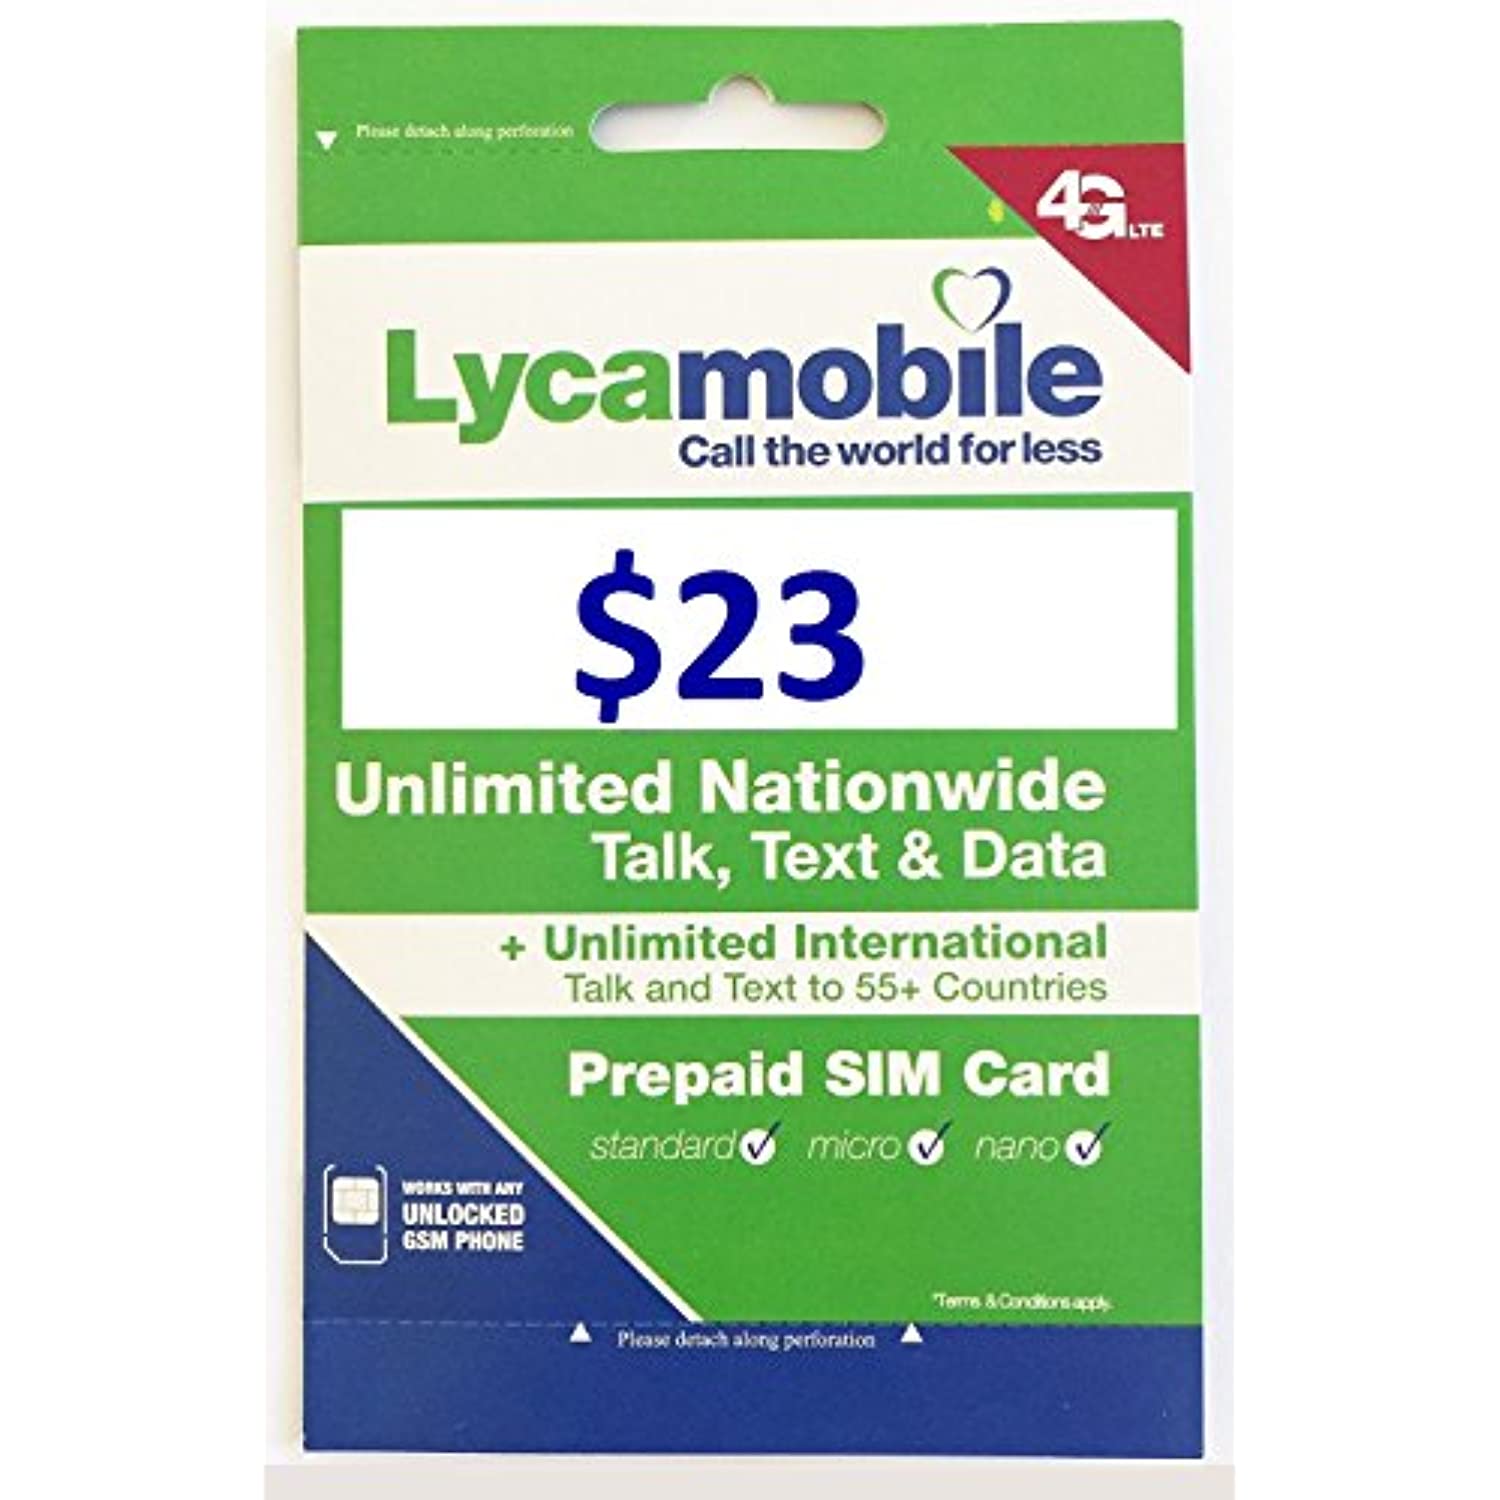 Lyca Mobile Triple Cut SIM Card with $23 Month Unlimited International Plan. Nano / Micro / Standard LycaMobile 4G LTE SIM Card All in One Prefunded Preloaded Activation Kit($23 Monthly Plan)